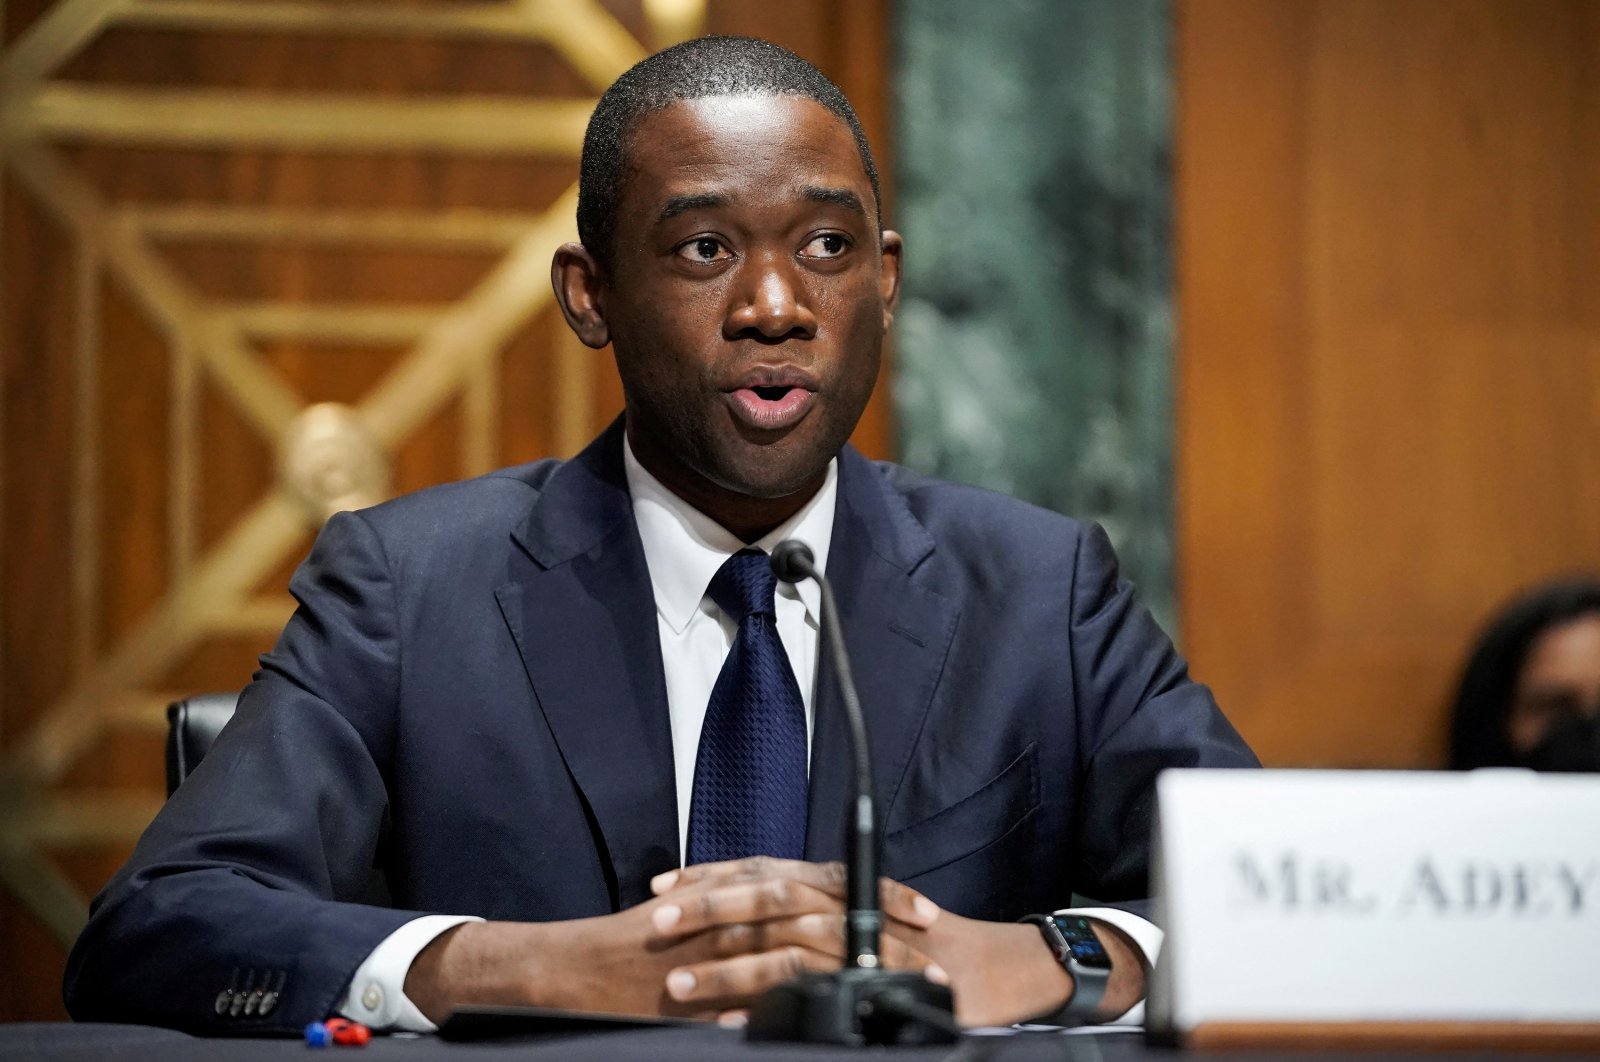 Economist Adewale &quot;Wally&quot; Adeyemo answers questions during his Senate Finance Committee nomination hearing to be Deputy Secretary of the U.S. Treasury, Washington, D.C., U.S., Feb. 23, 2021. (Reuters Photo)